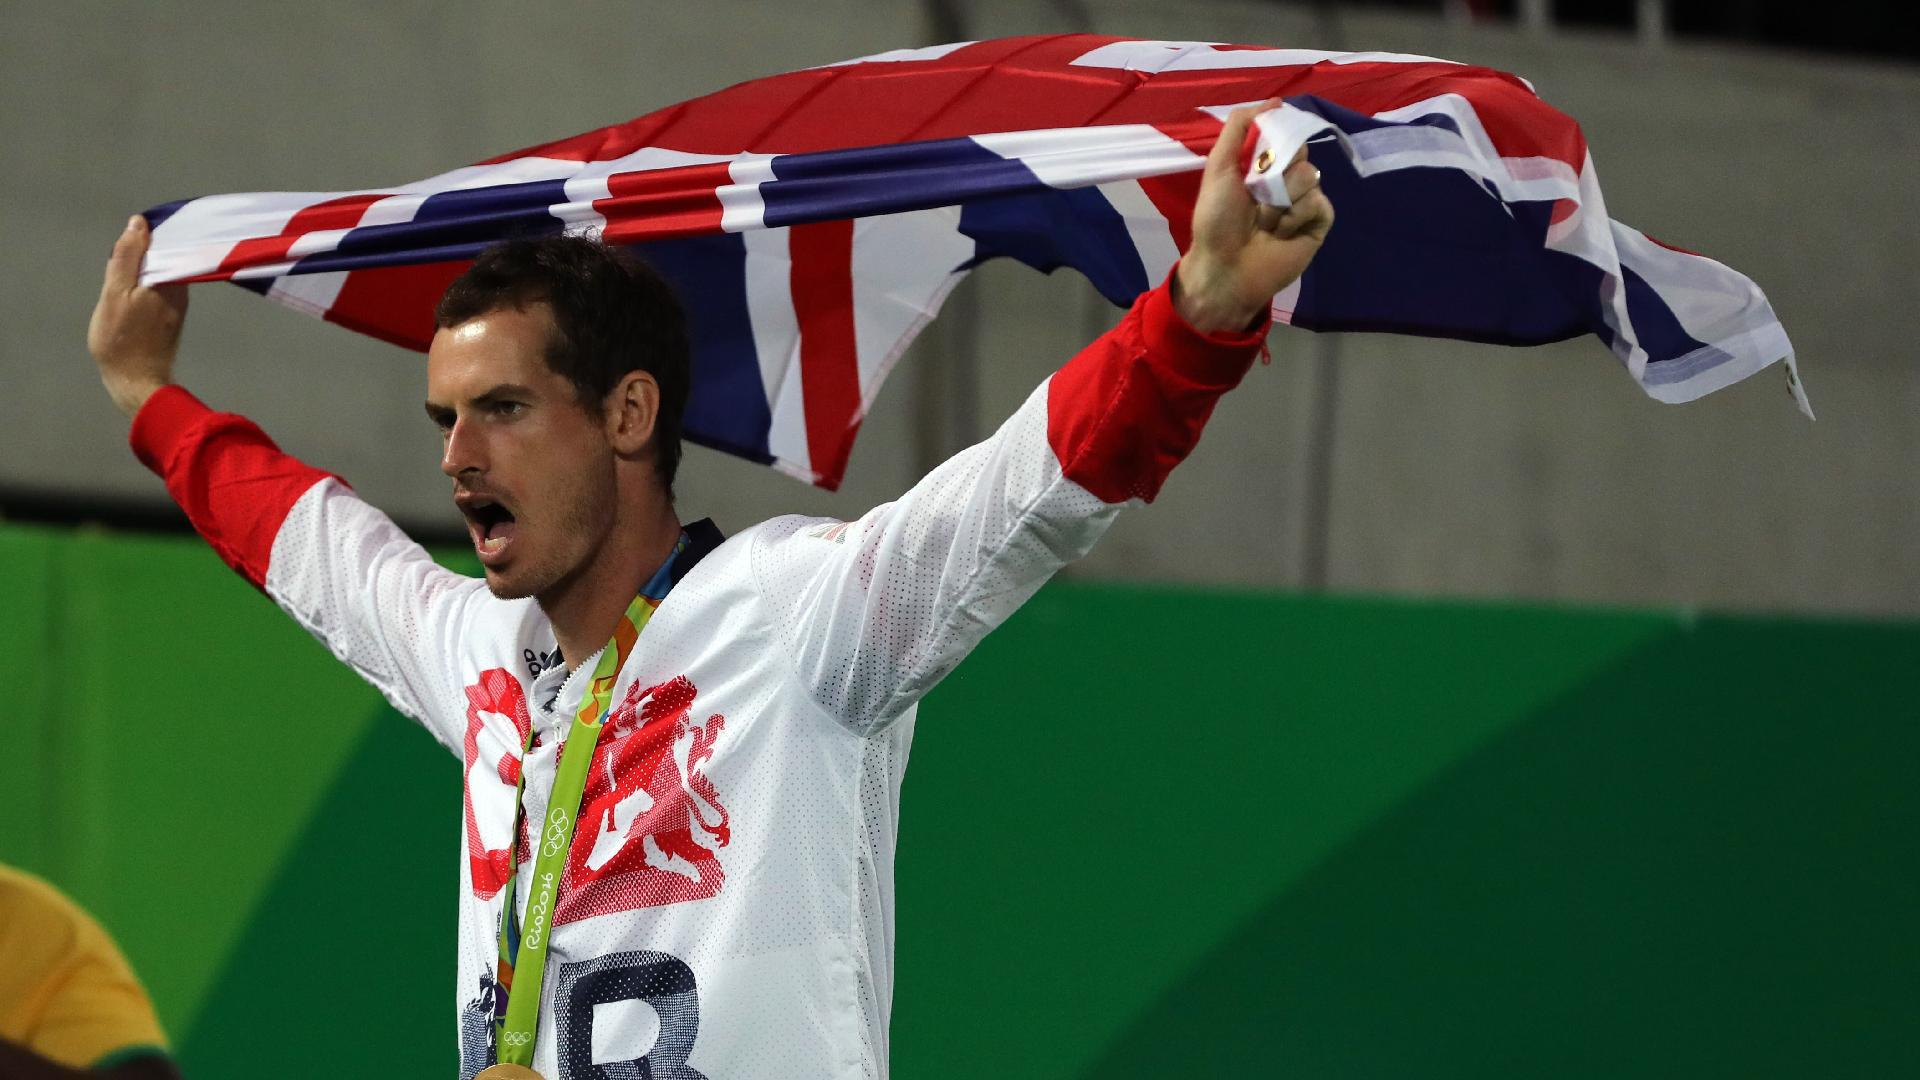 Owen Humphreys/PA : Andy Murray is the only player to have won two gold medals at the Olympics in men’s singles.